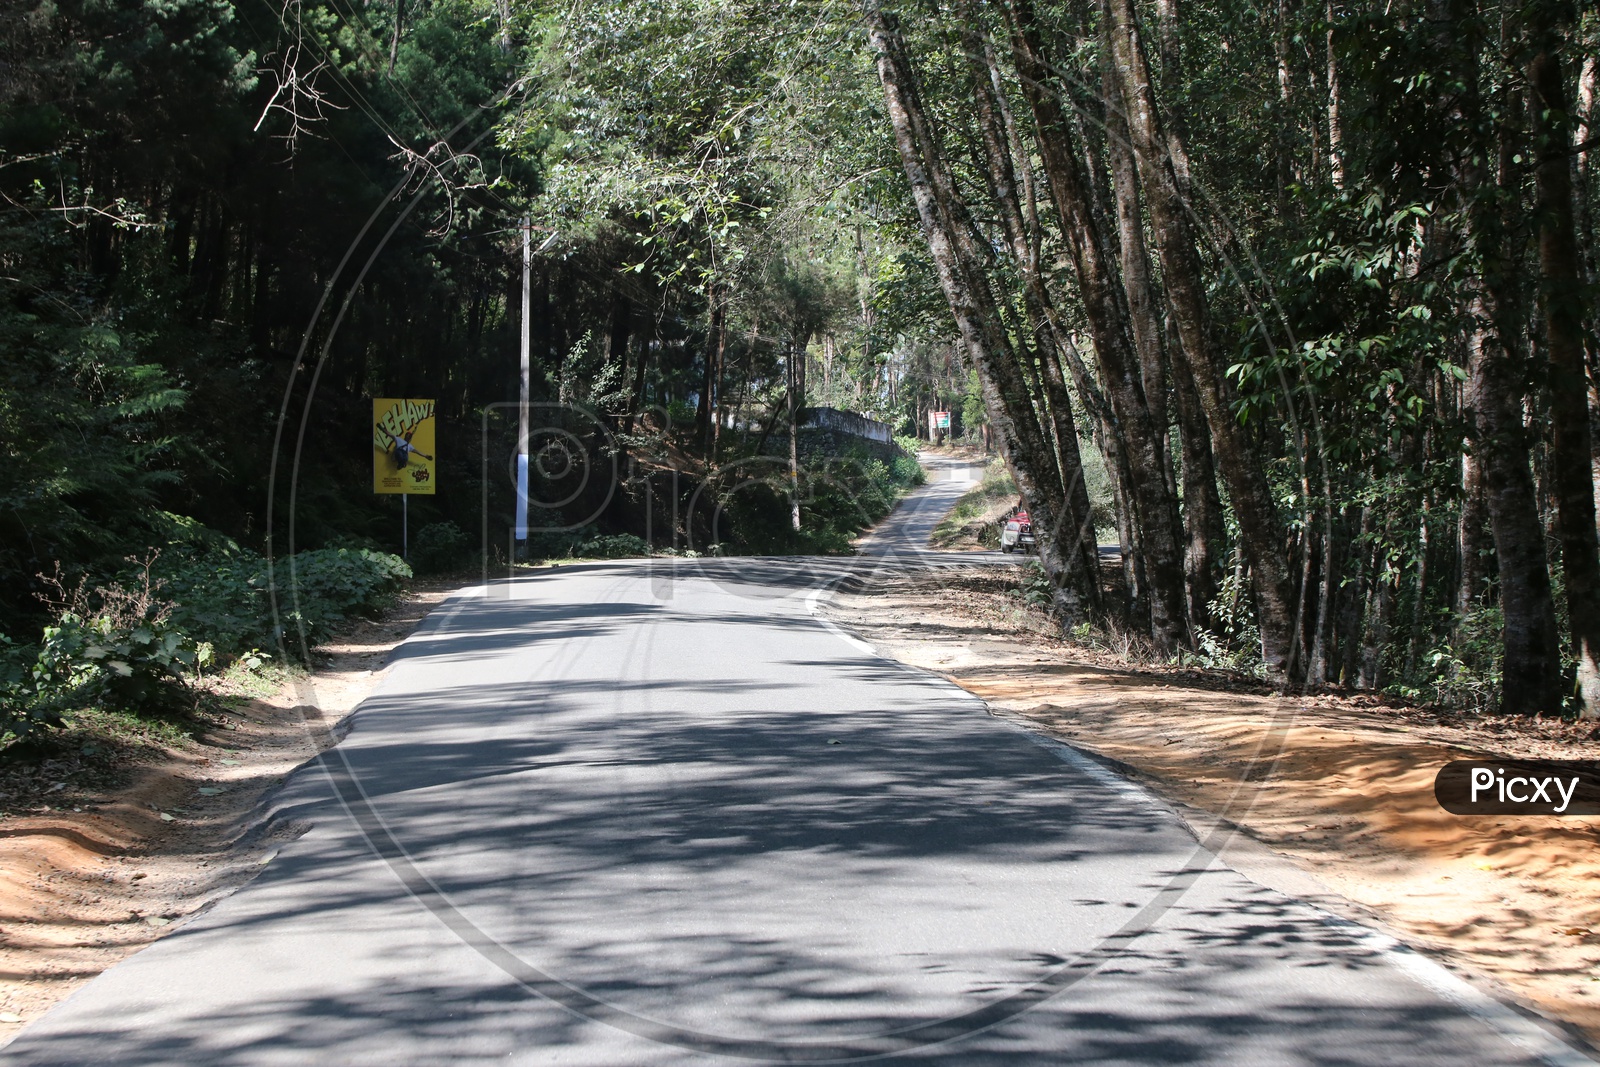 Roads In Munnar With Trees On Both Sides Of Roads